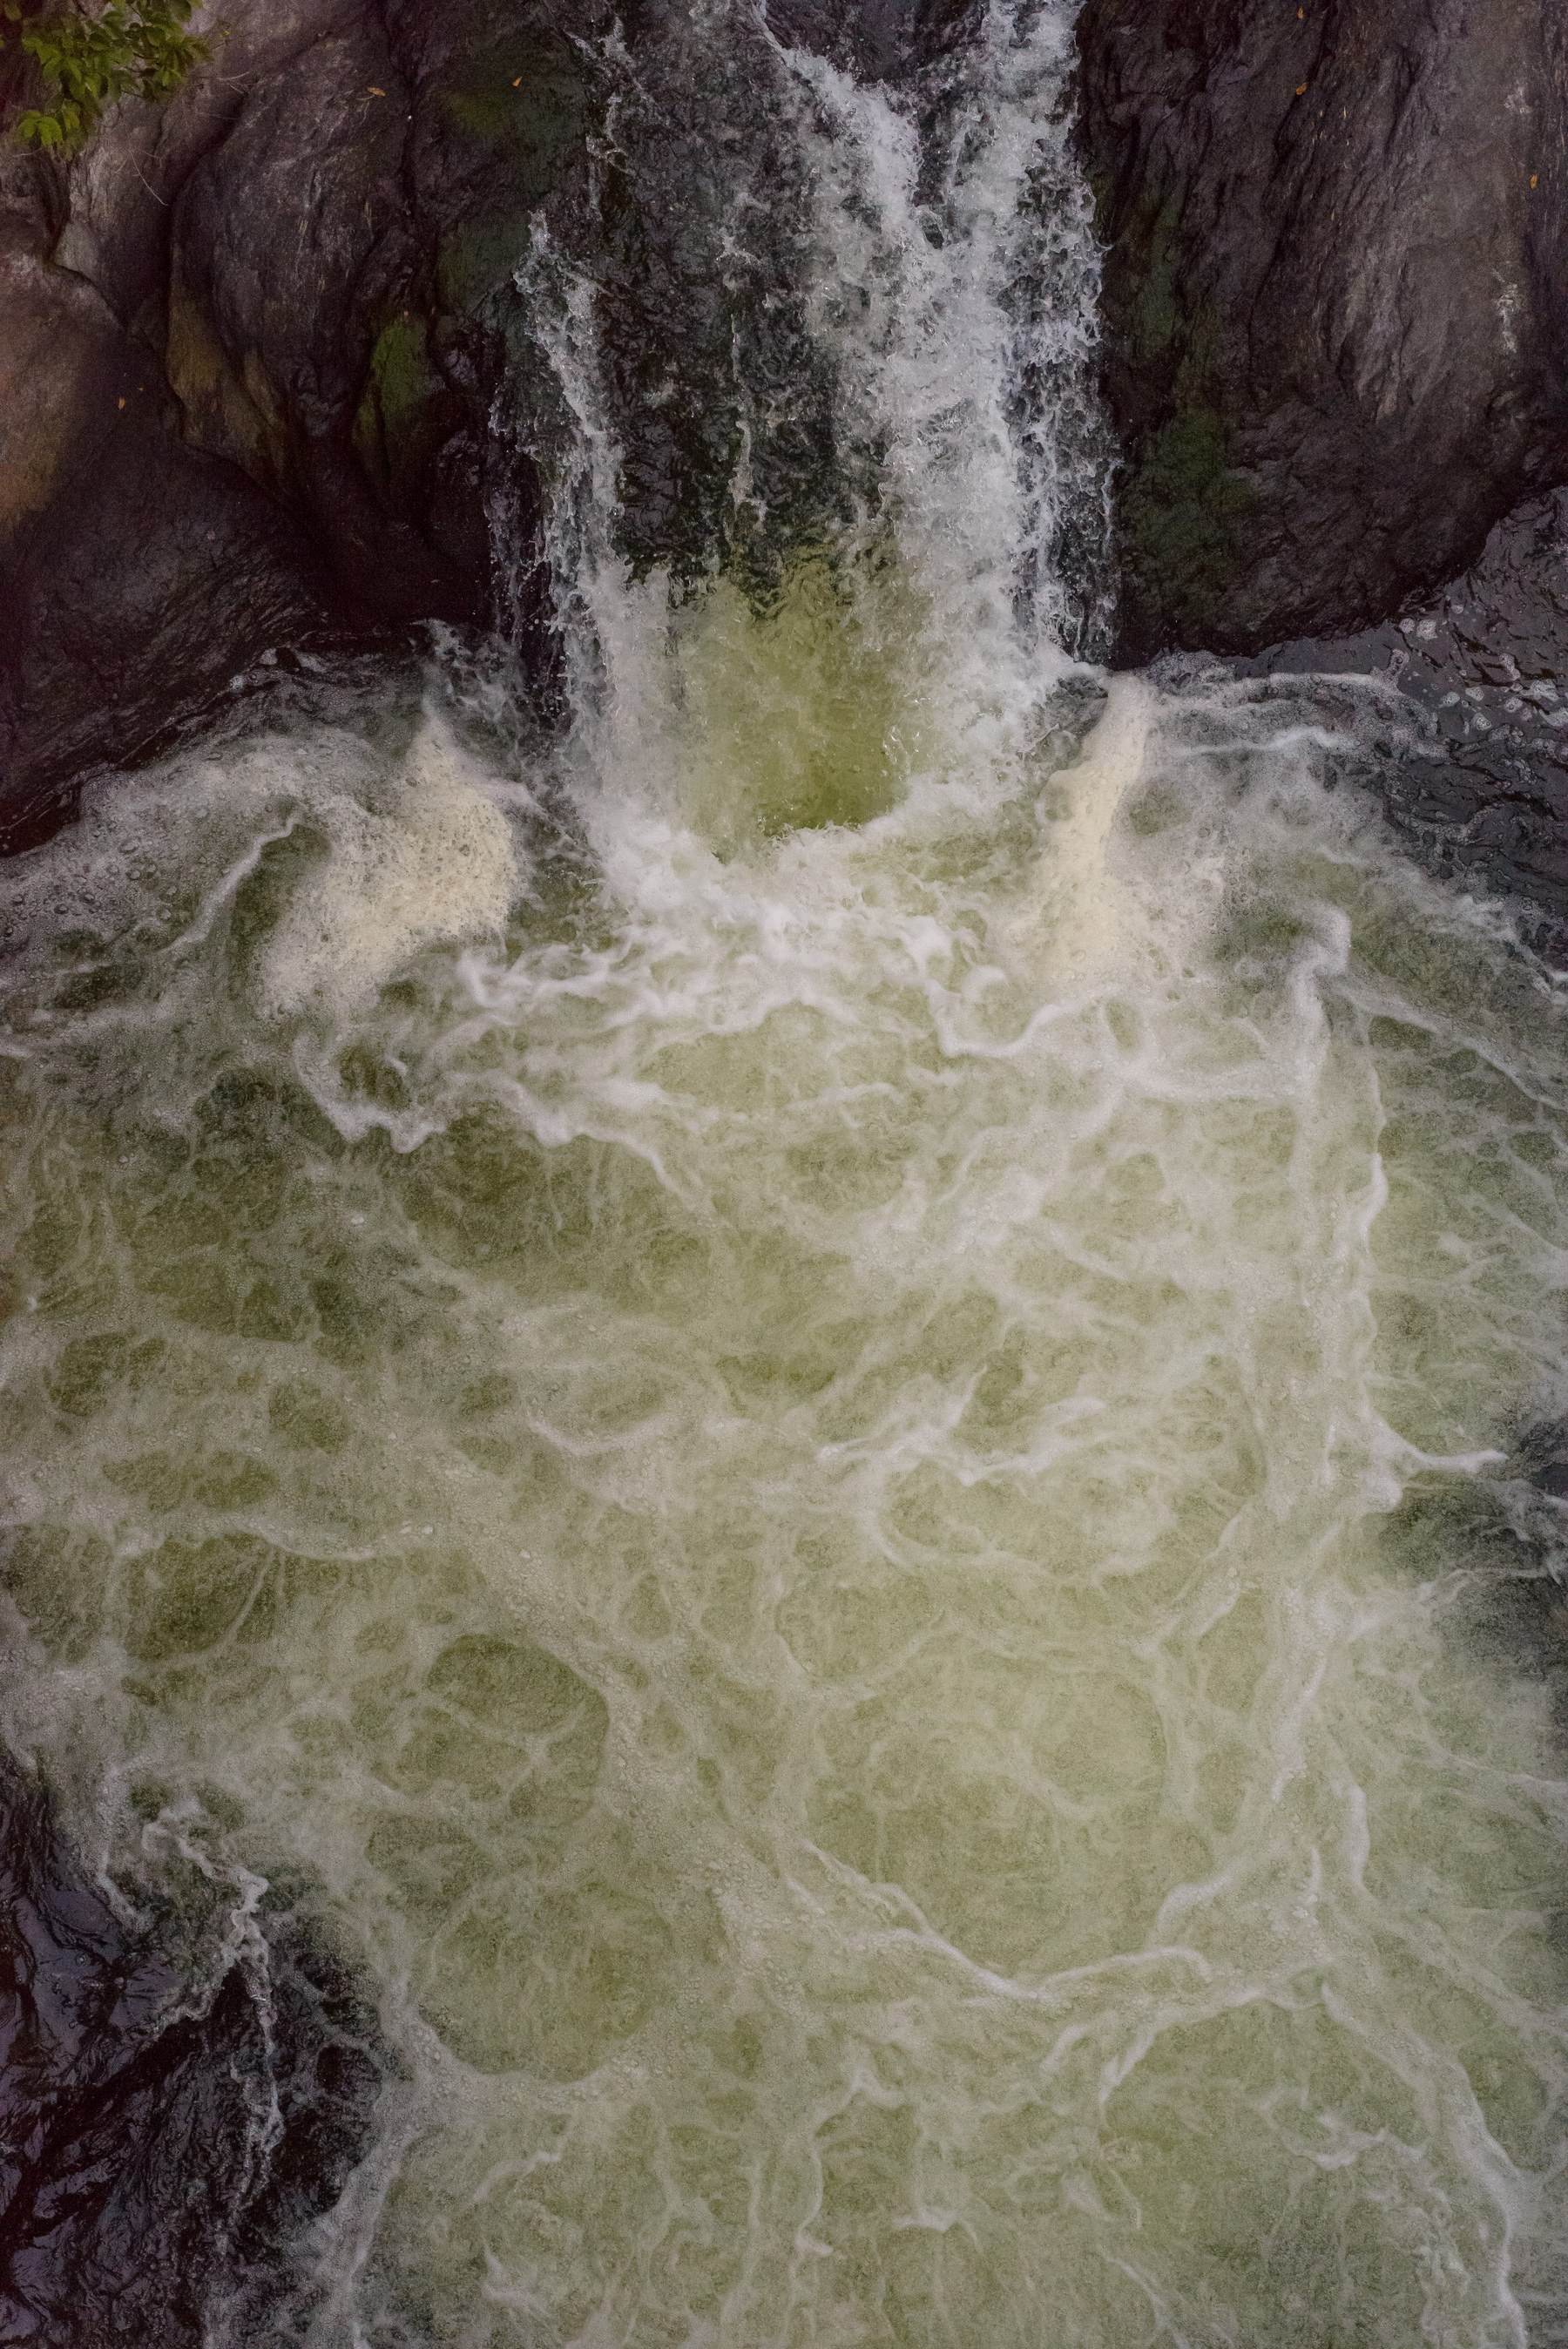 Waterfall viewed from above.